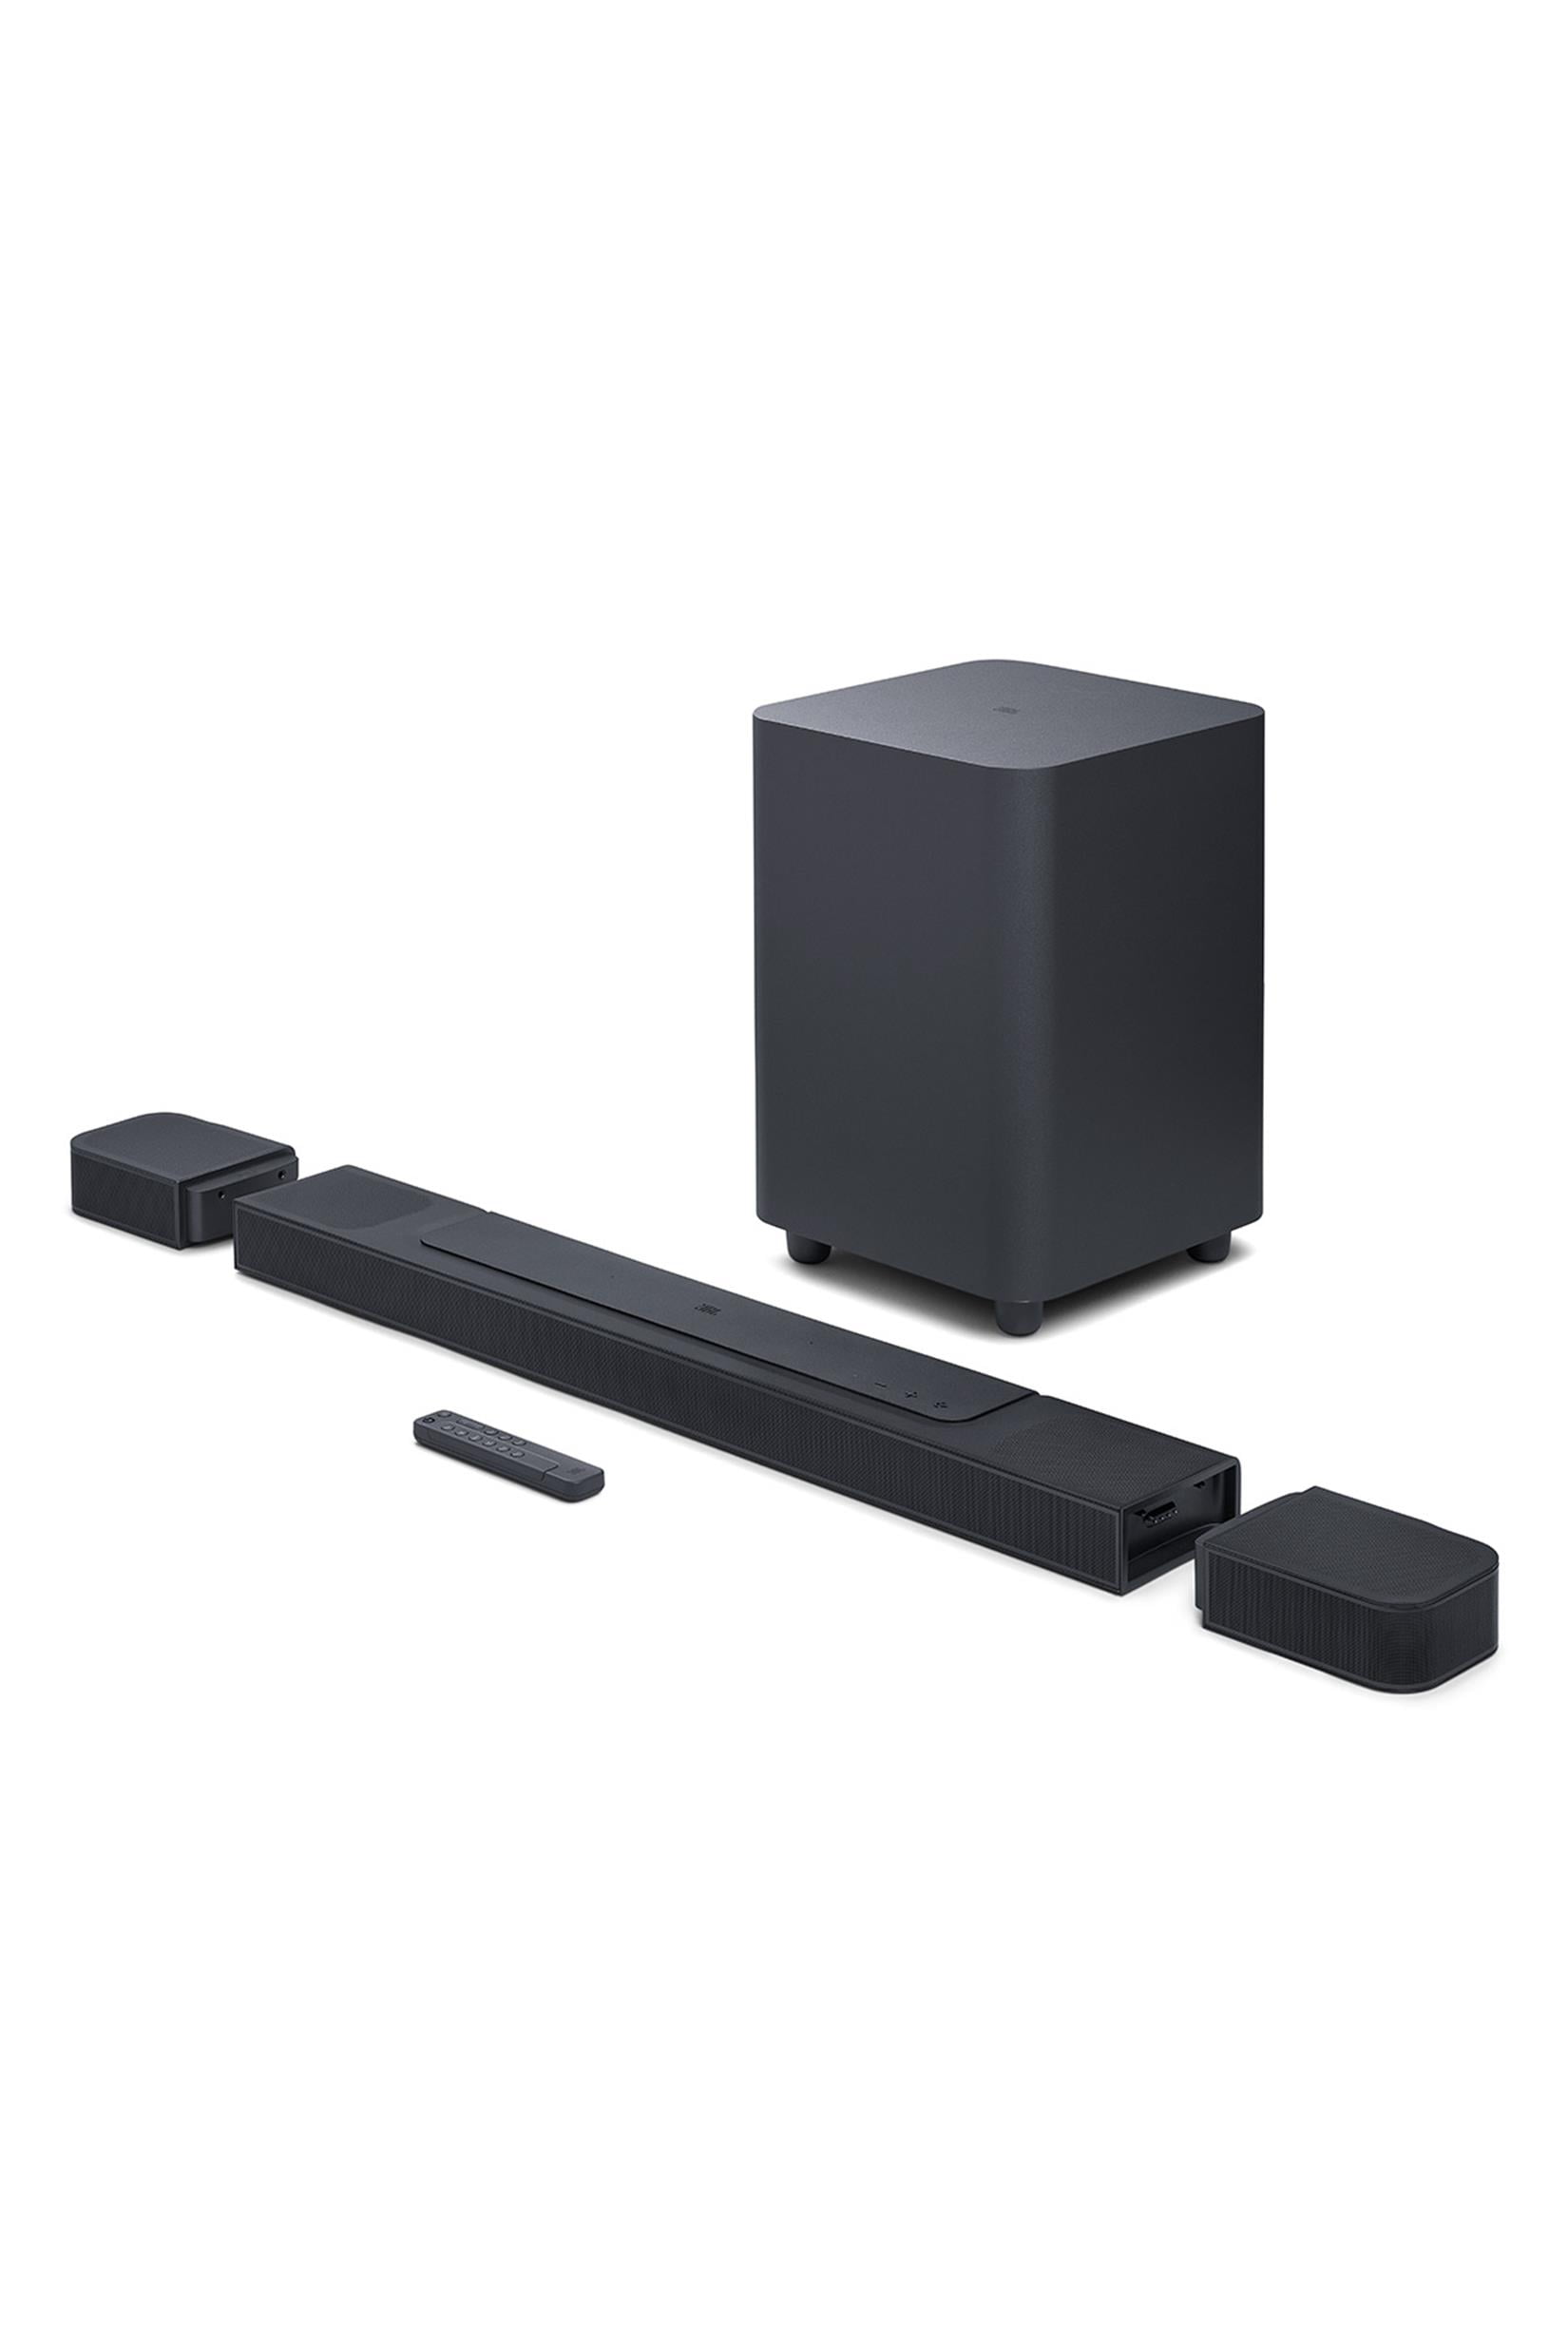 sammenholdt Nominering Synslinie JBL Bar 1000 Surround Sound System with 7.1.4 Channel Soundbar, 10"  Wireless Subwoofer, Detachable Rear Speakers, and Dolby Atmos - Walmart.com